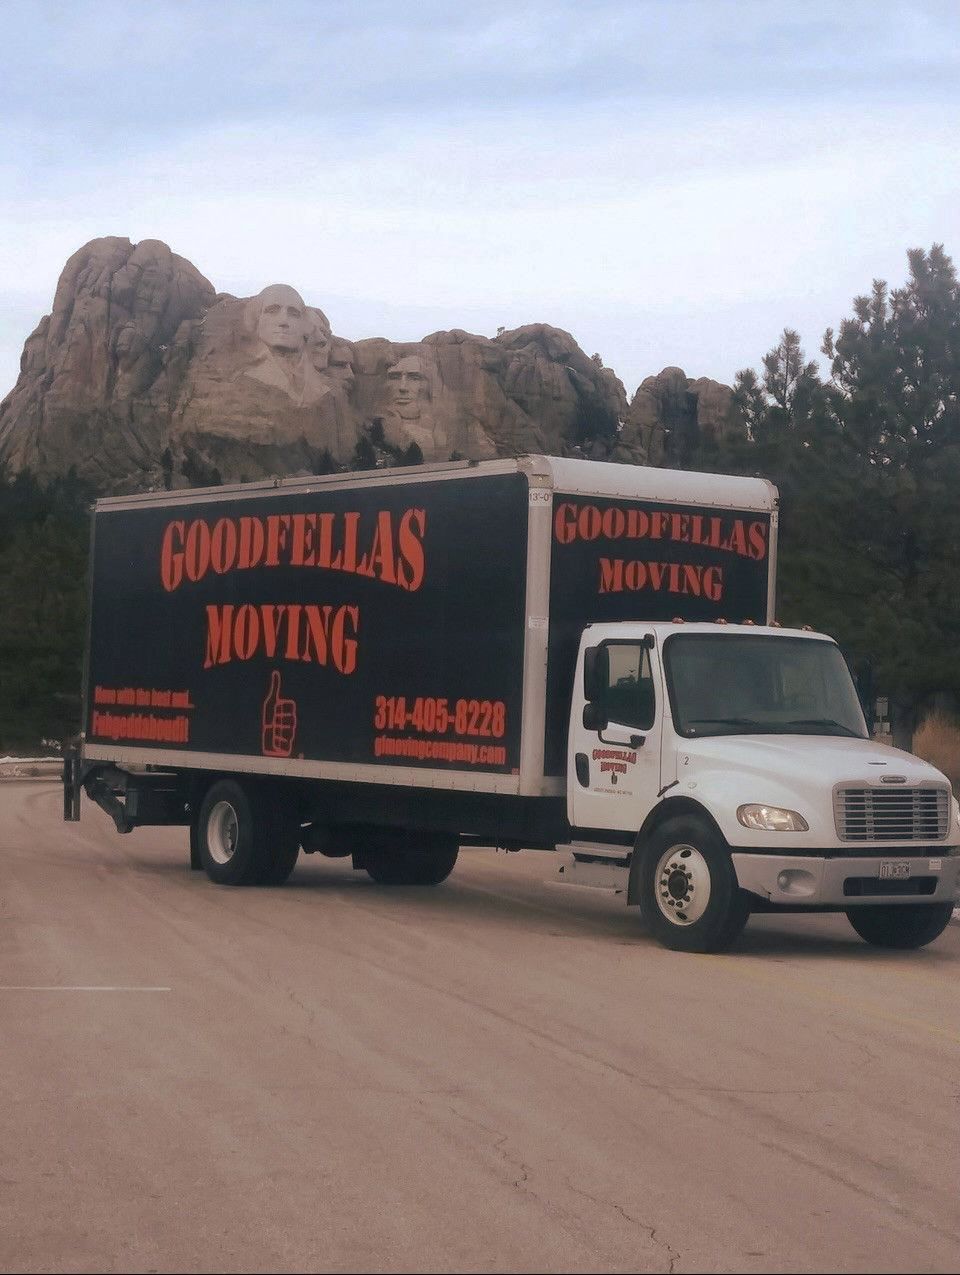 A Goodfellas moving truck driving in front of Mt Rushmore